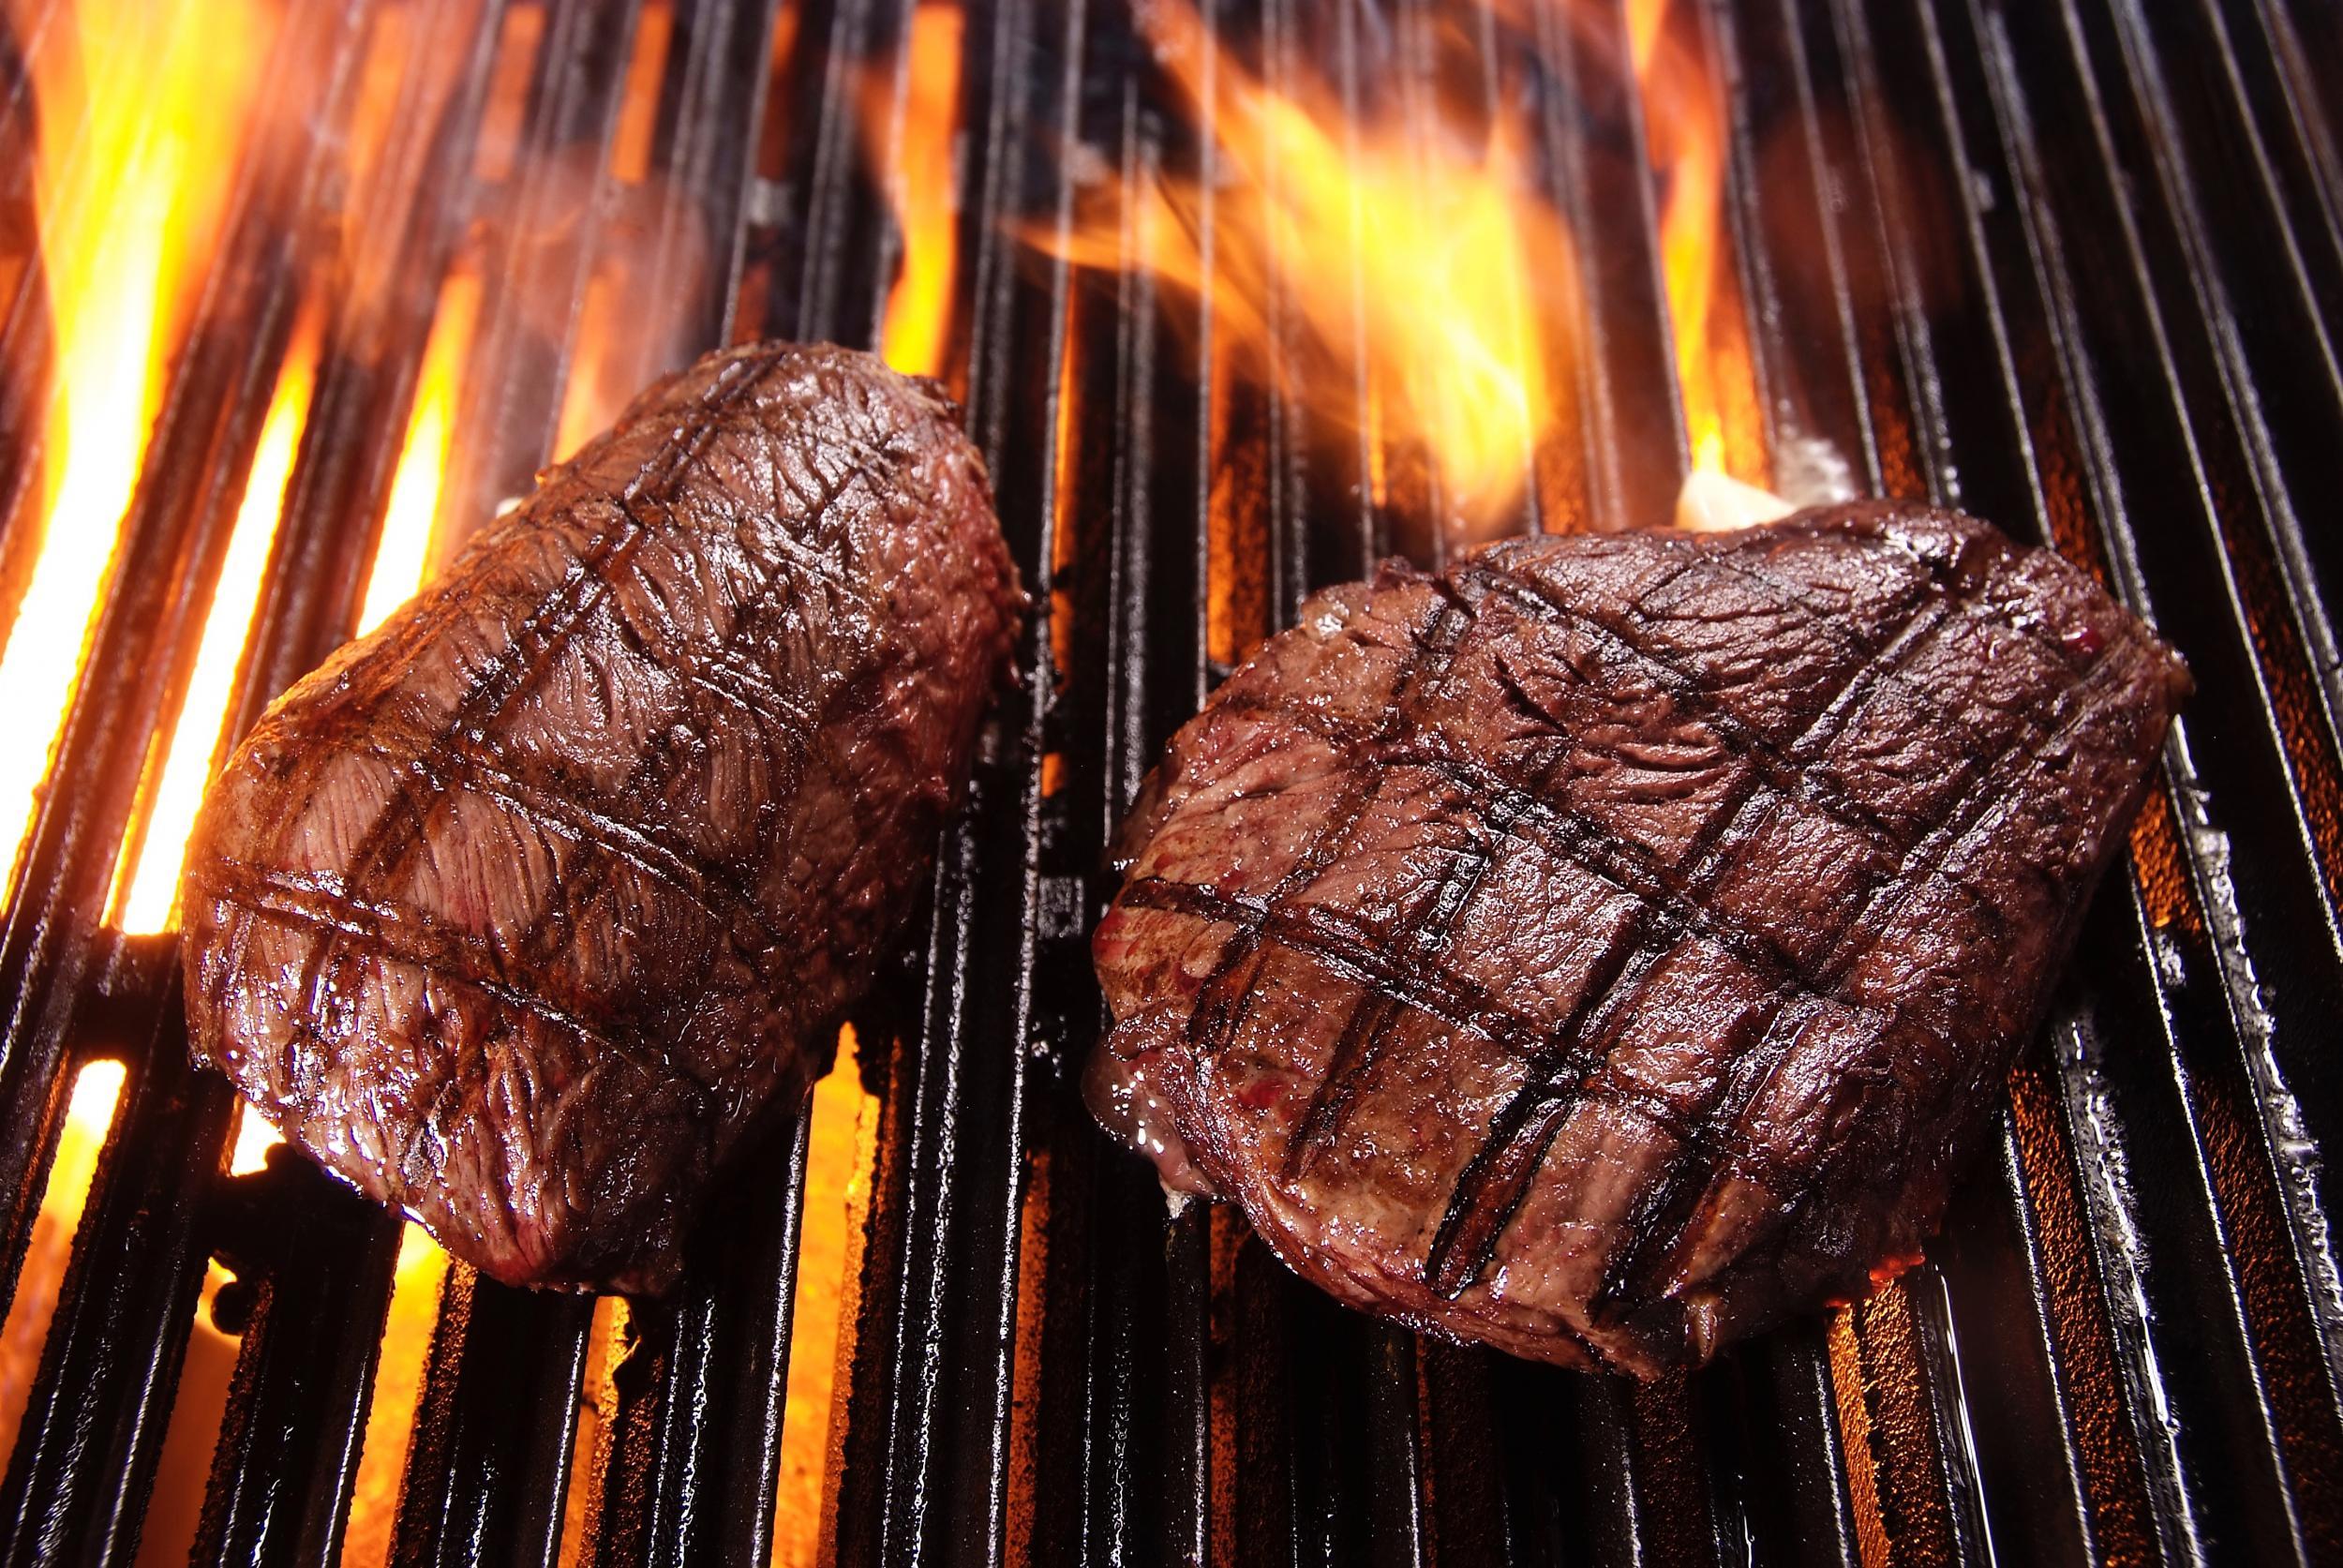 Five common mistakes people make when cooking steak, according to top chefs